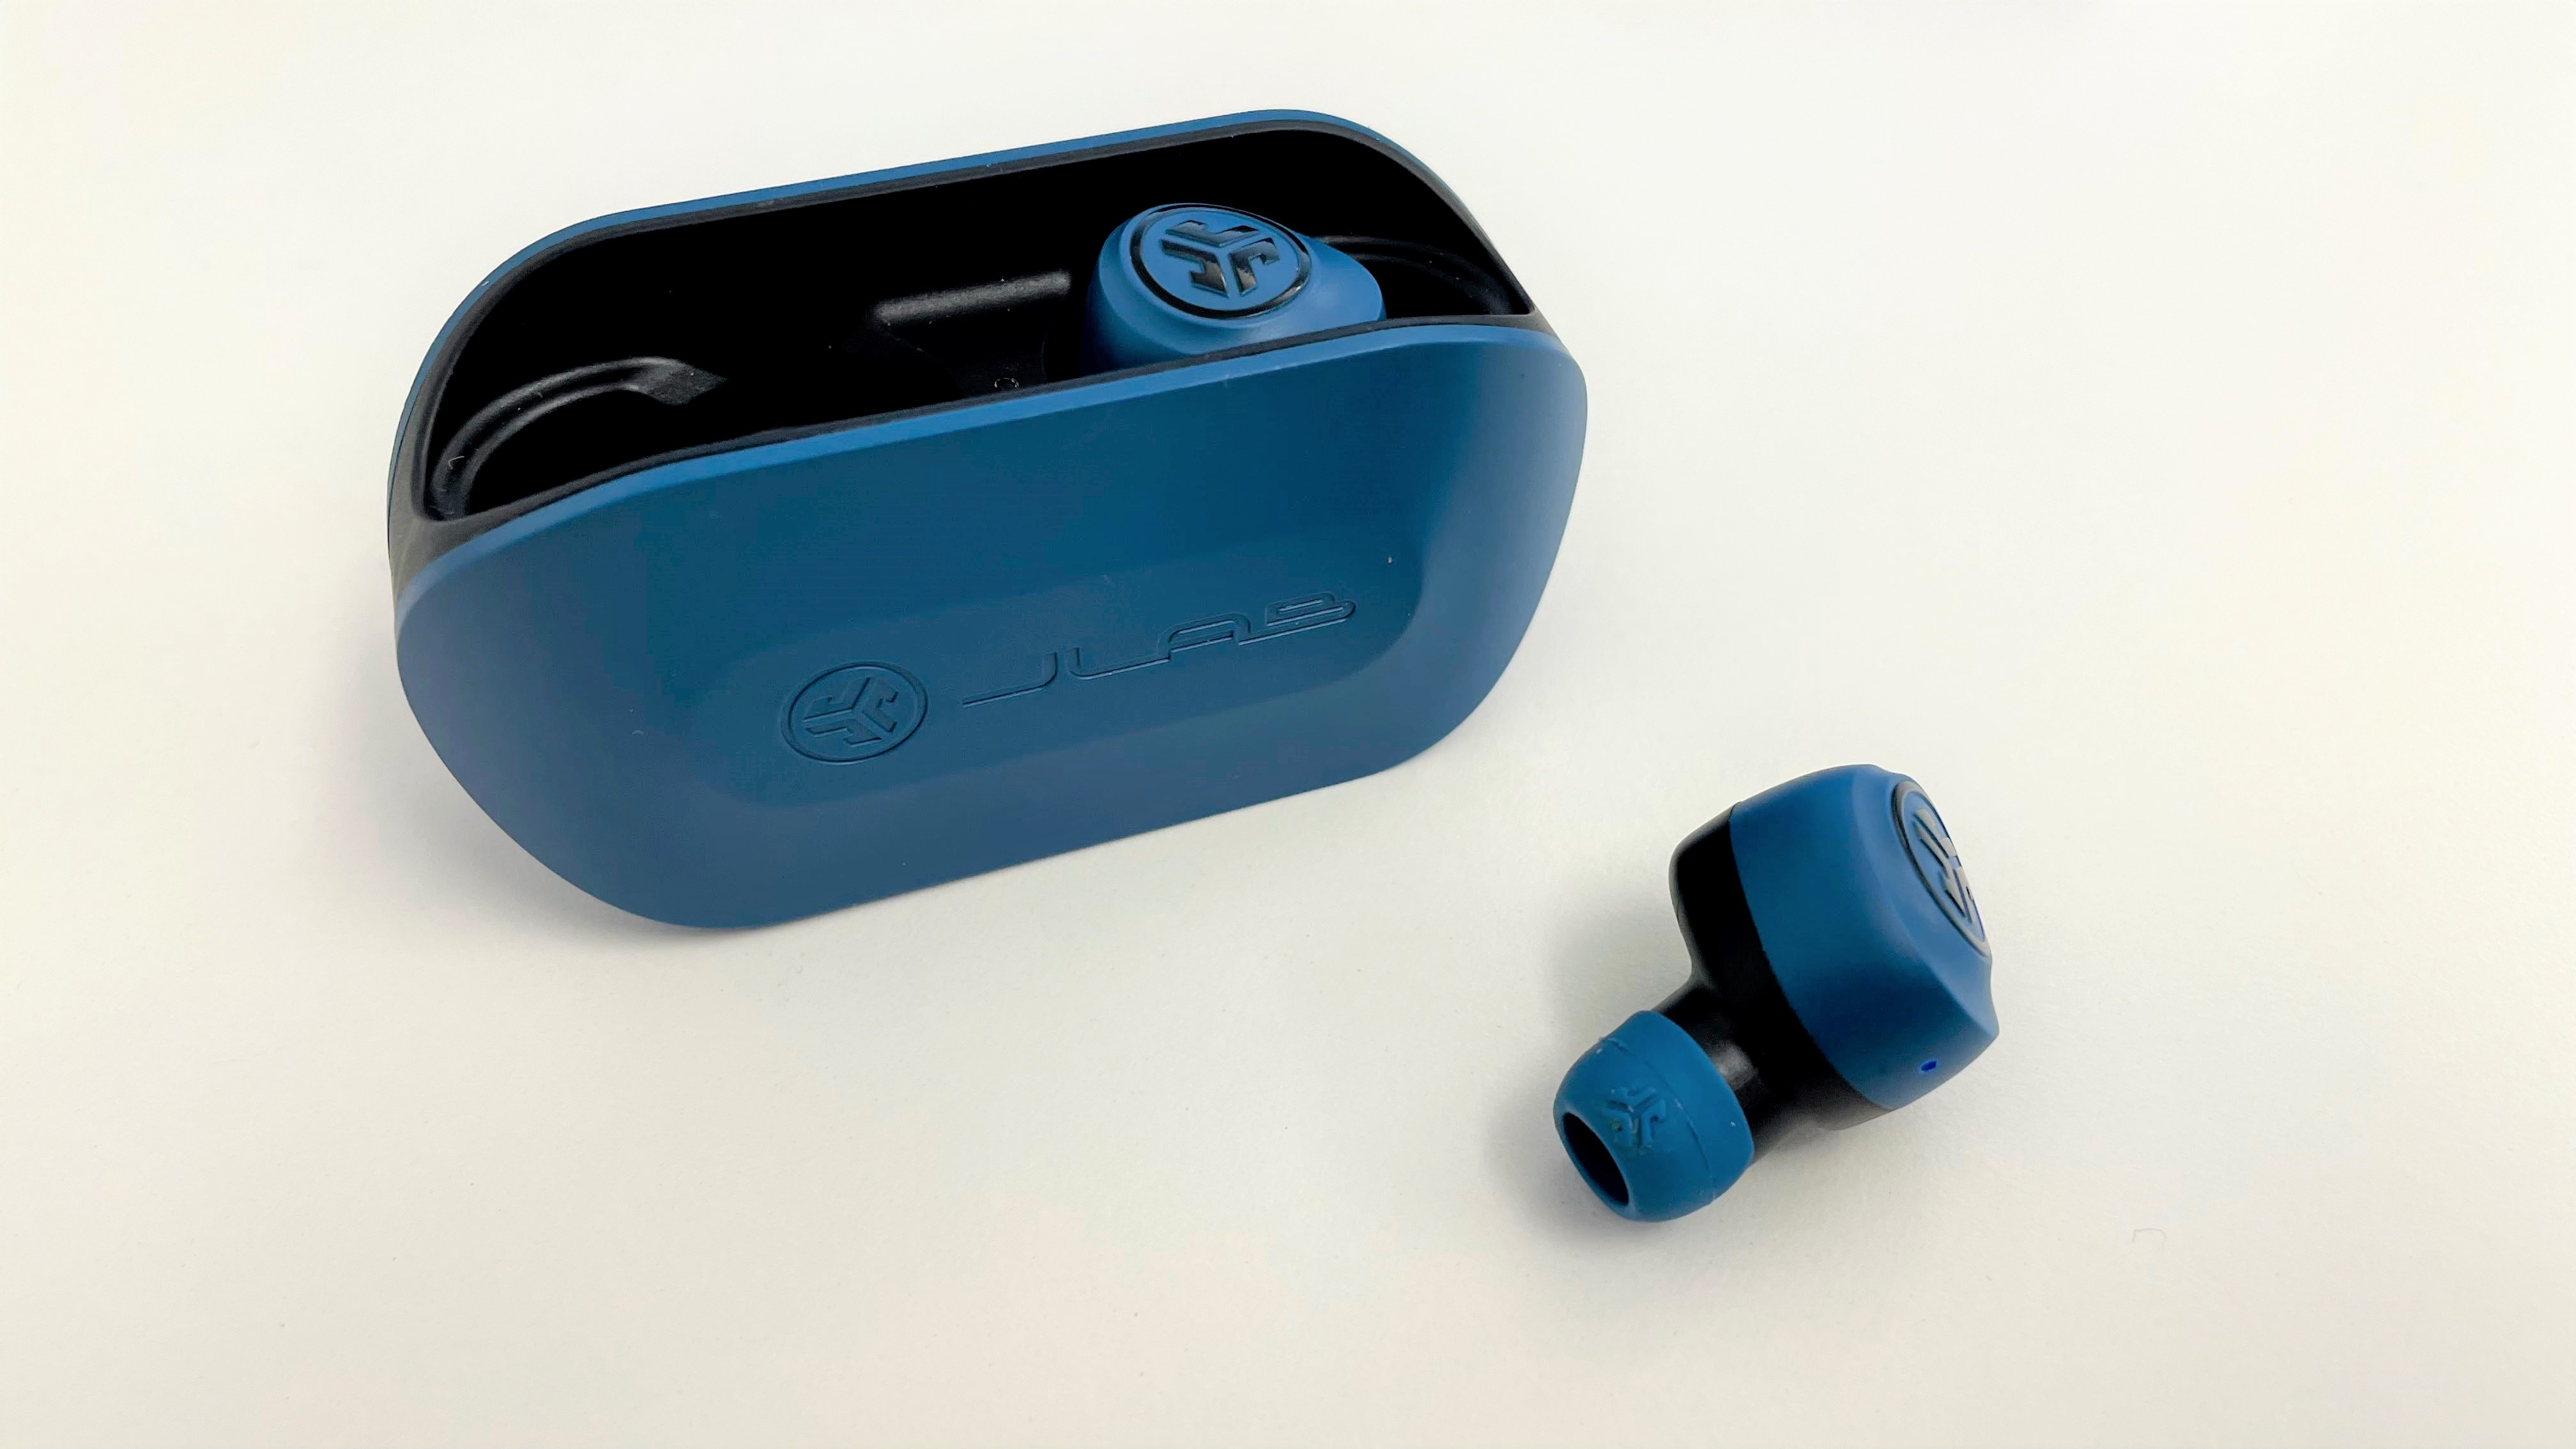 During CES, JLab Will Change The Look Of Audio With GO Air